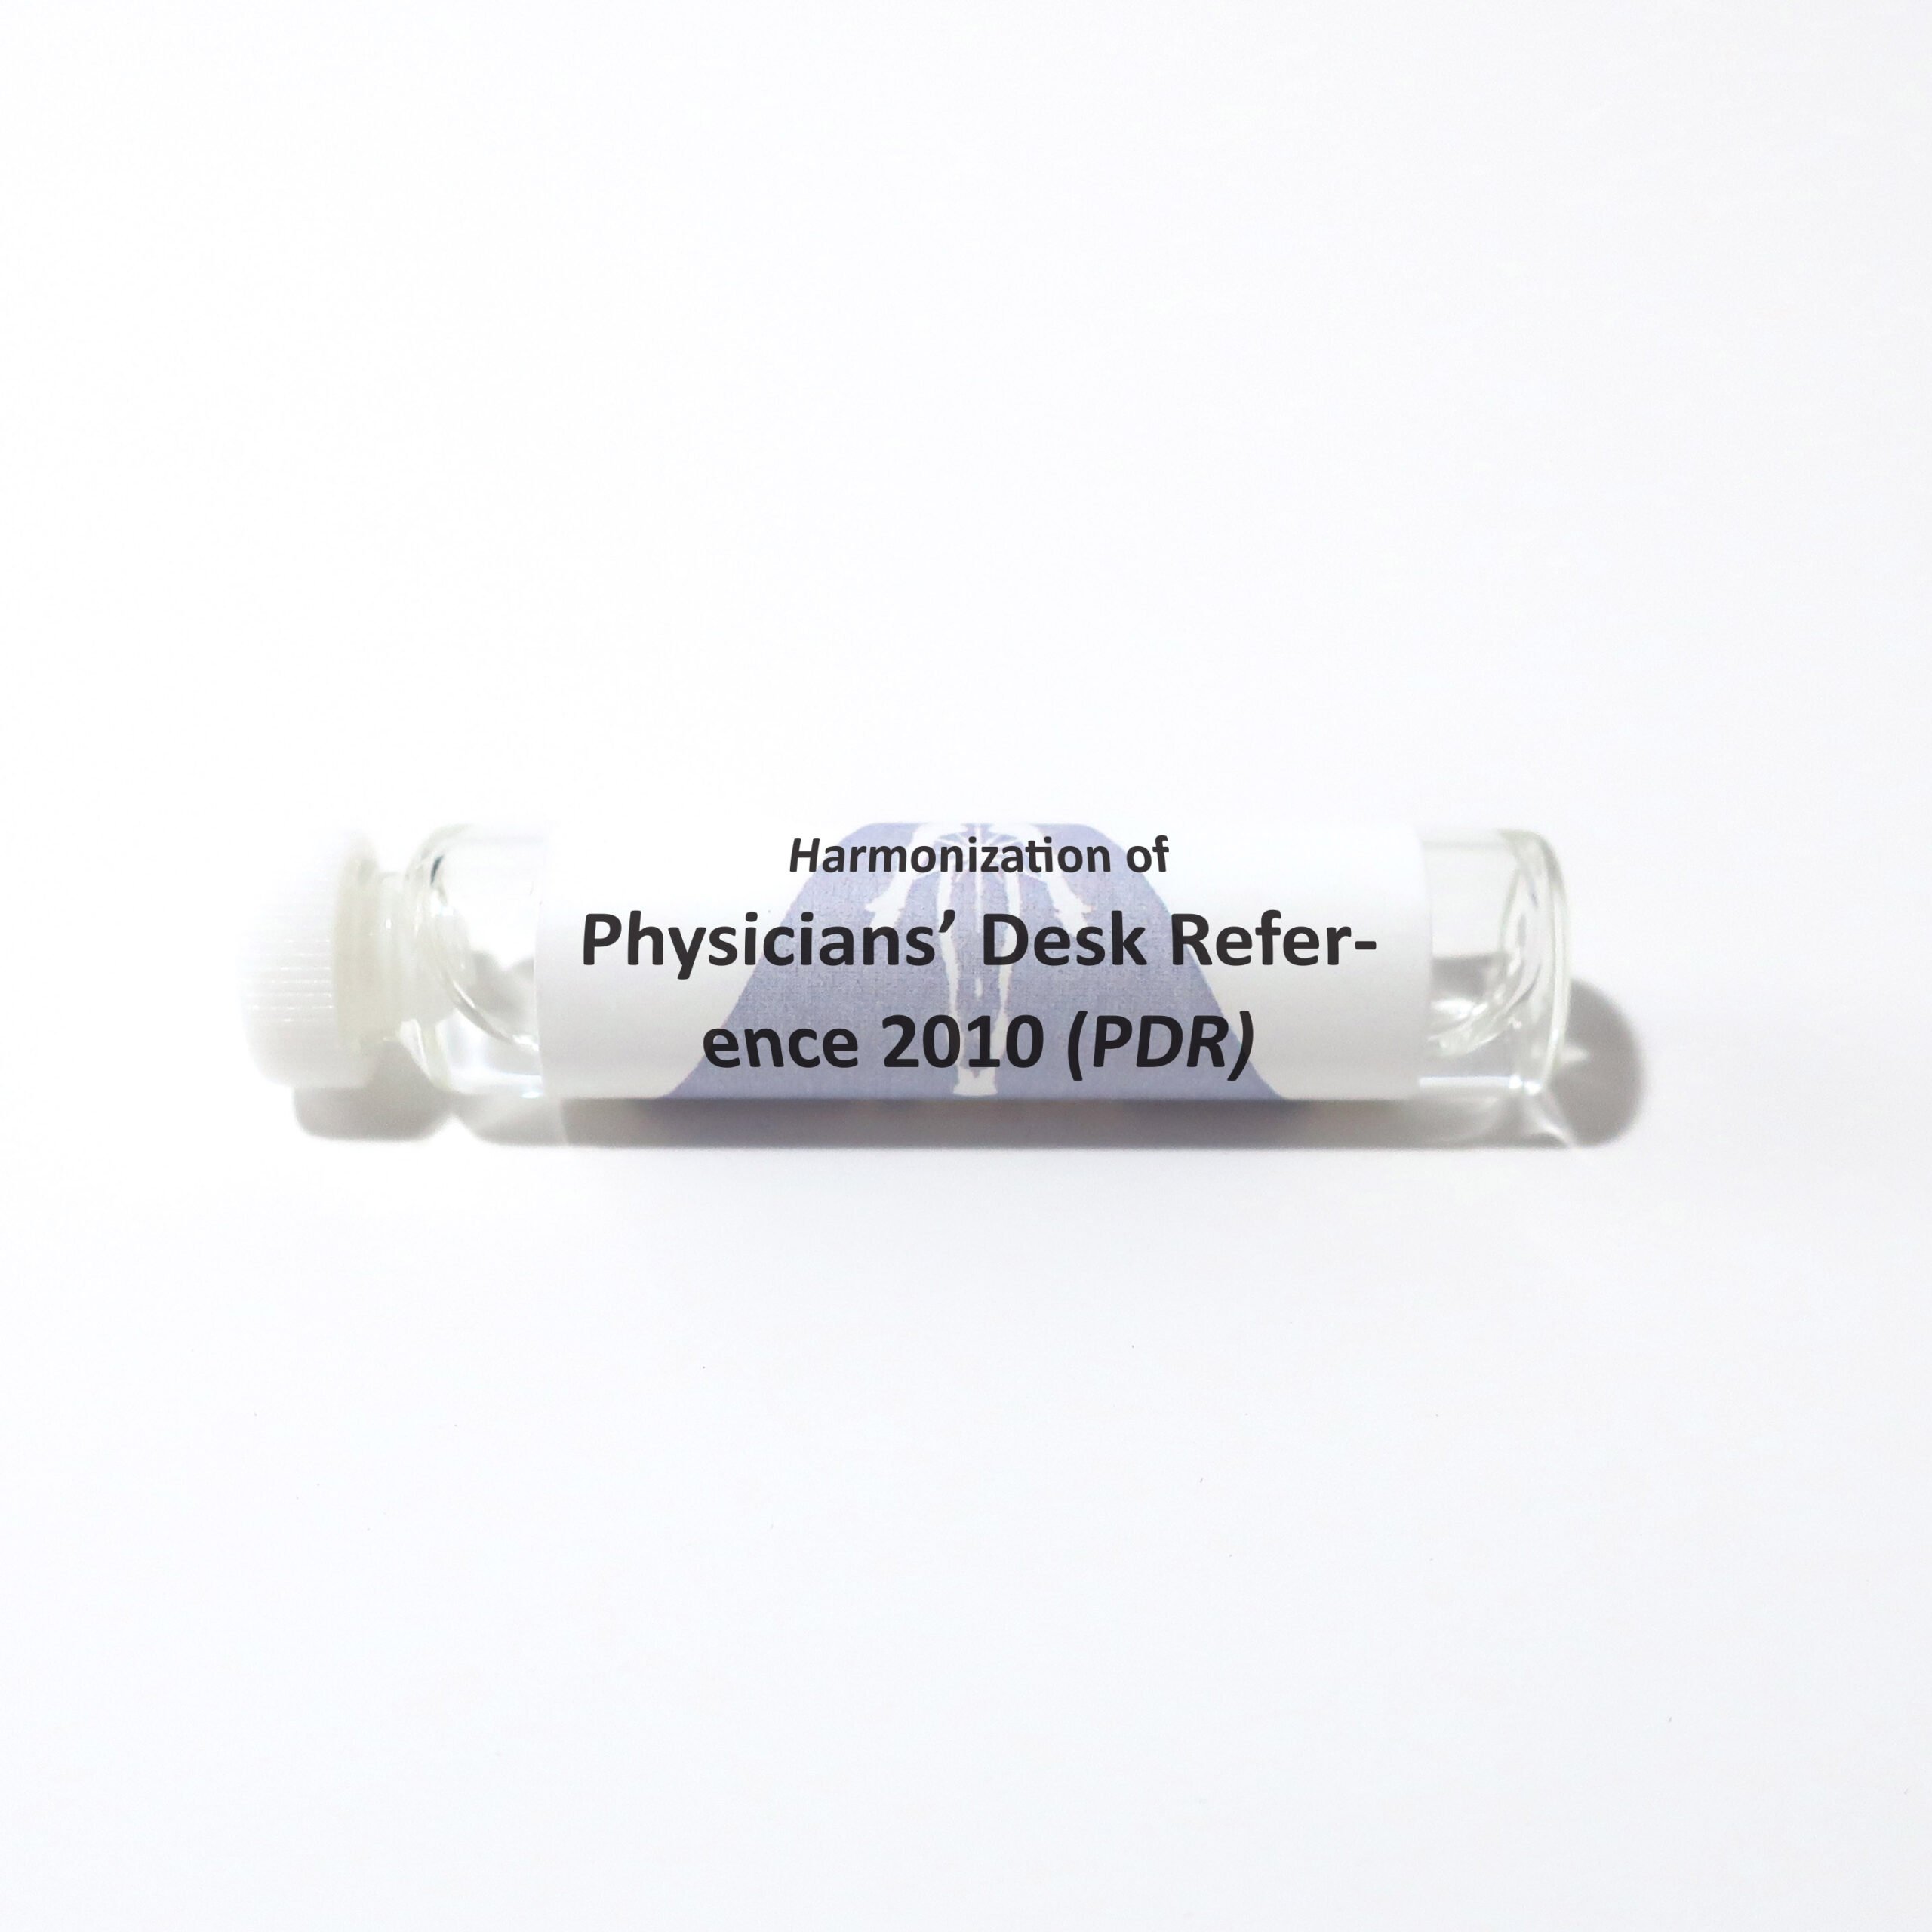 Physicians' Desk Reference 2010 (PDR)